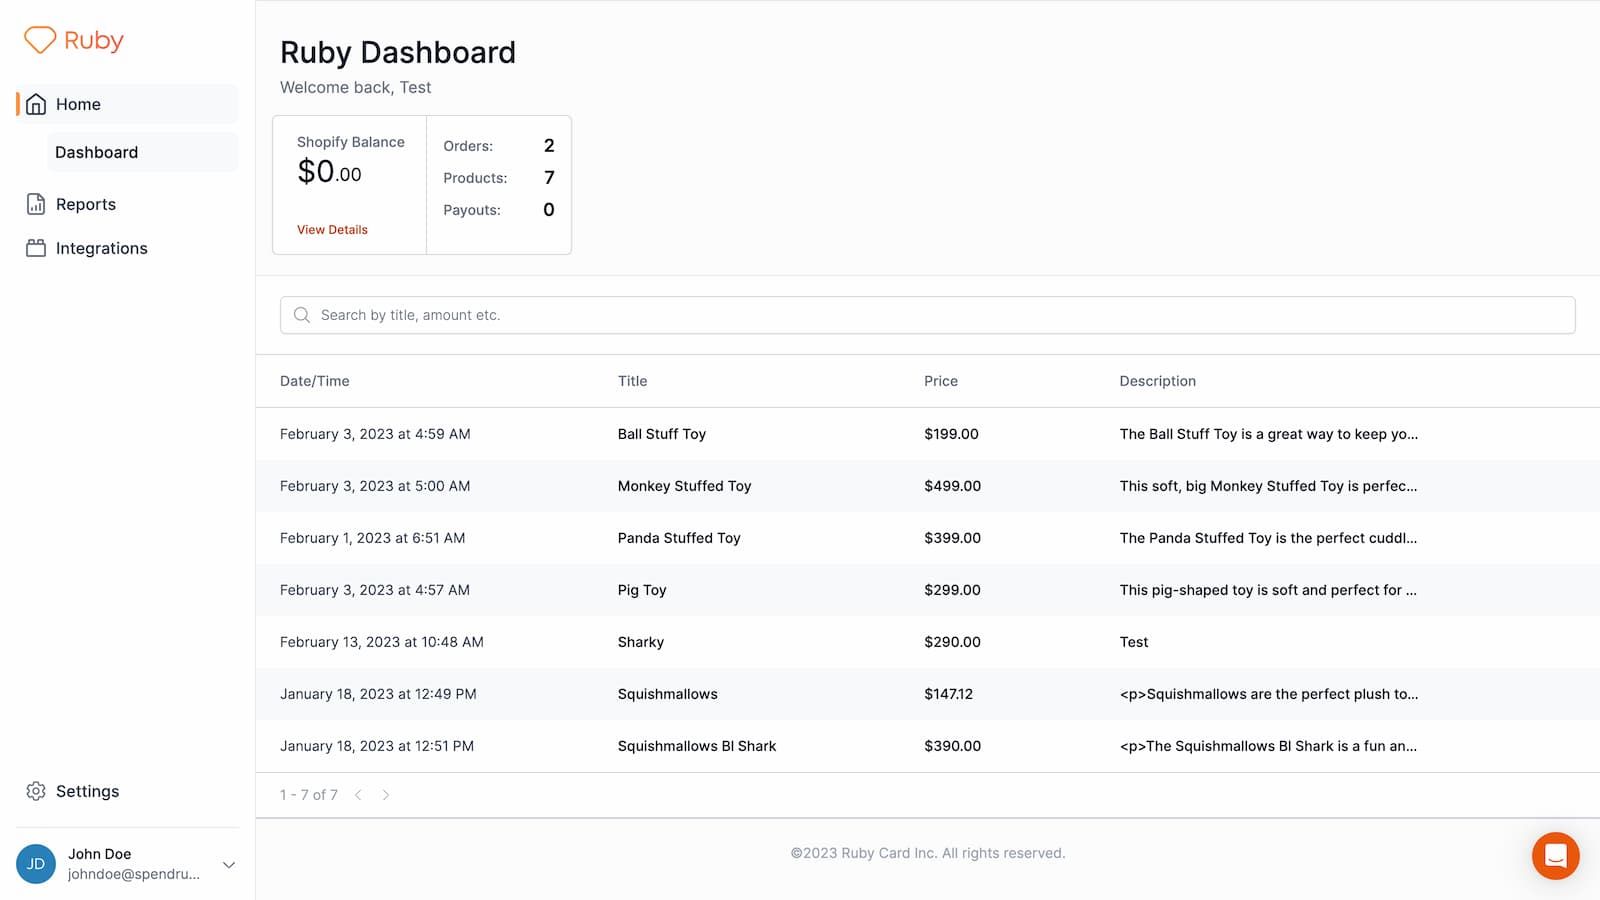 View a list of your products and overview in the dashboard home